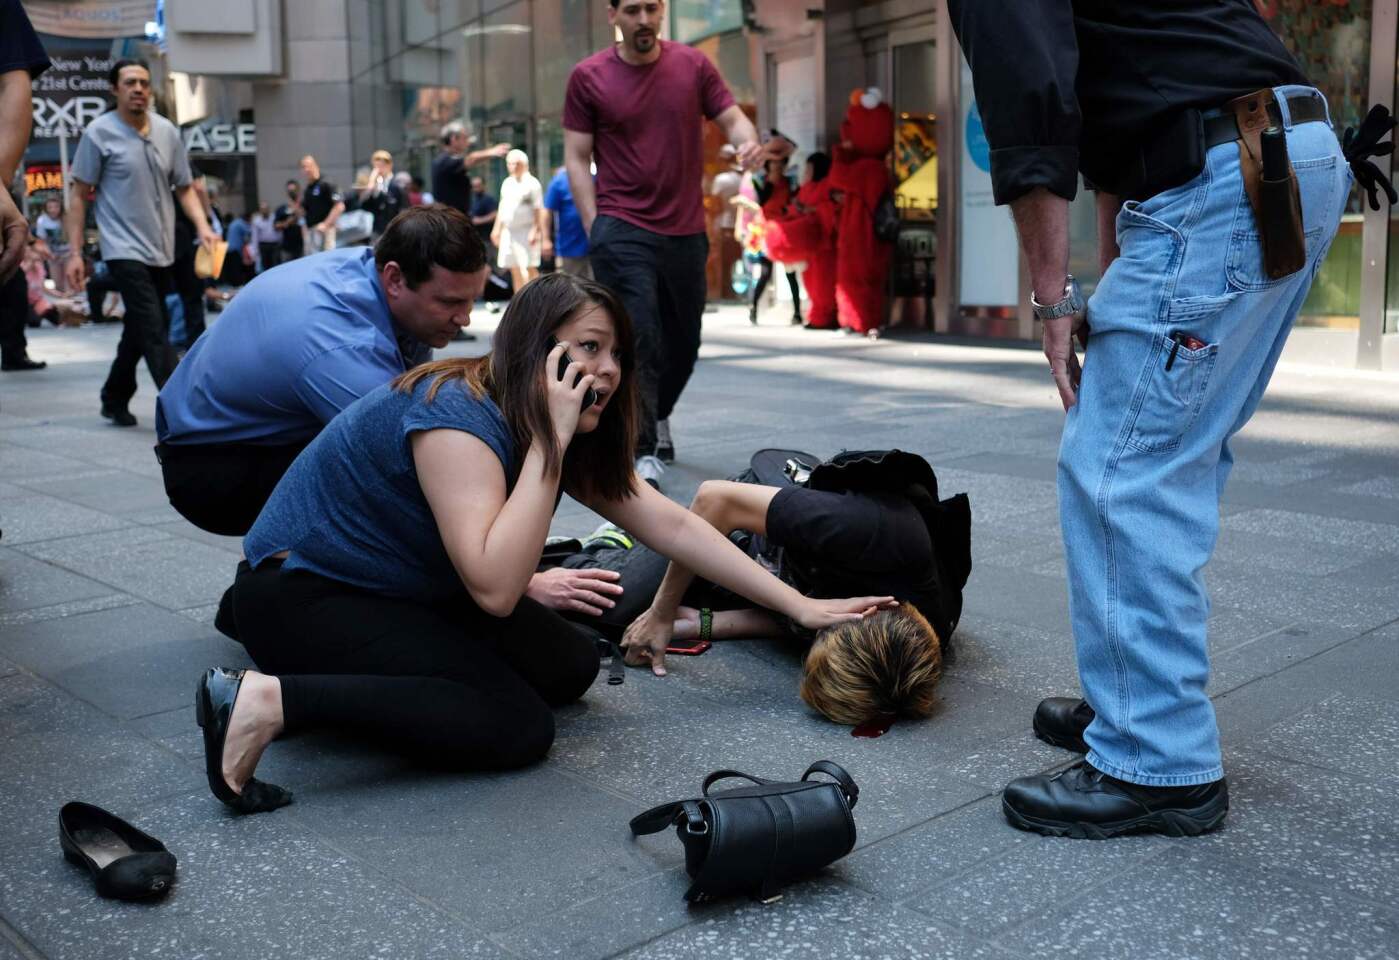 People attend to an injured man after a car plowed into Times Square in New York and struck several people.